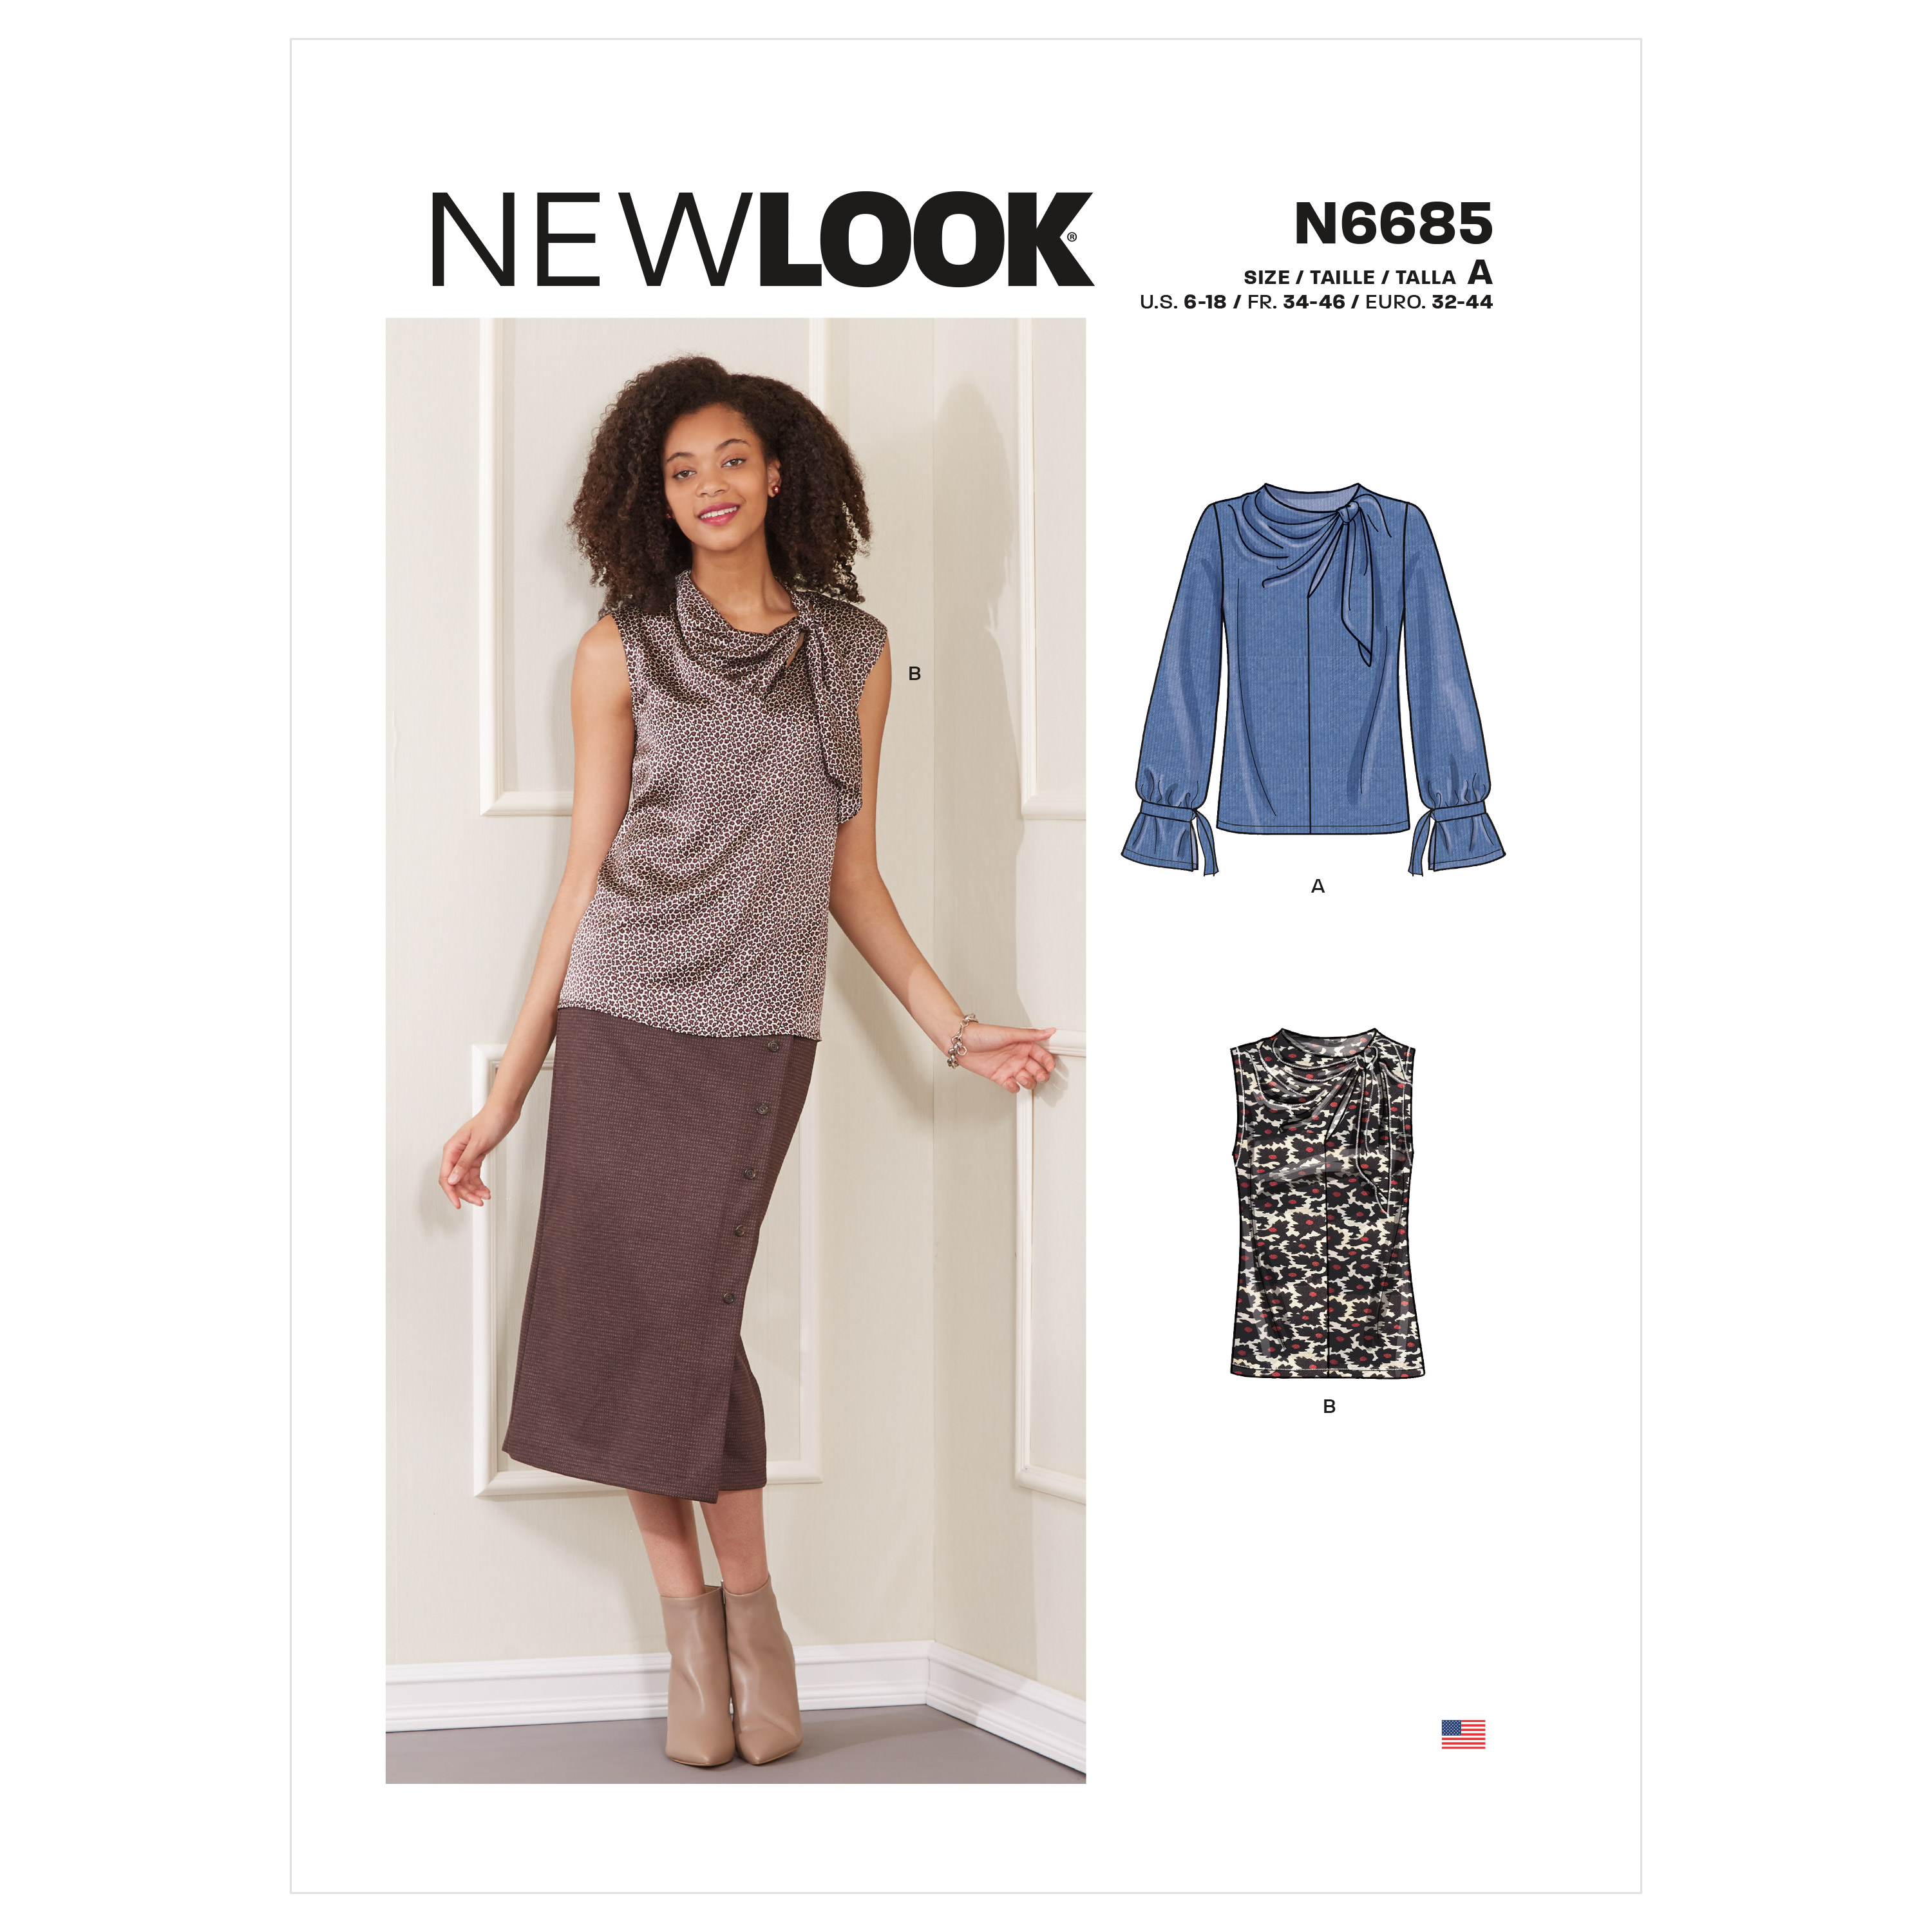 New Look 6685 Misses' Sleeveless Or Long-sleeved Tops